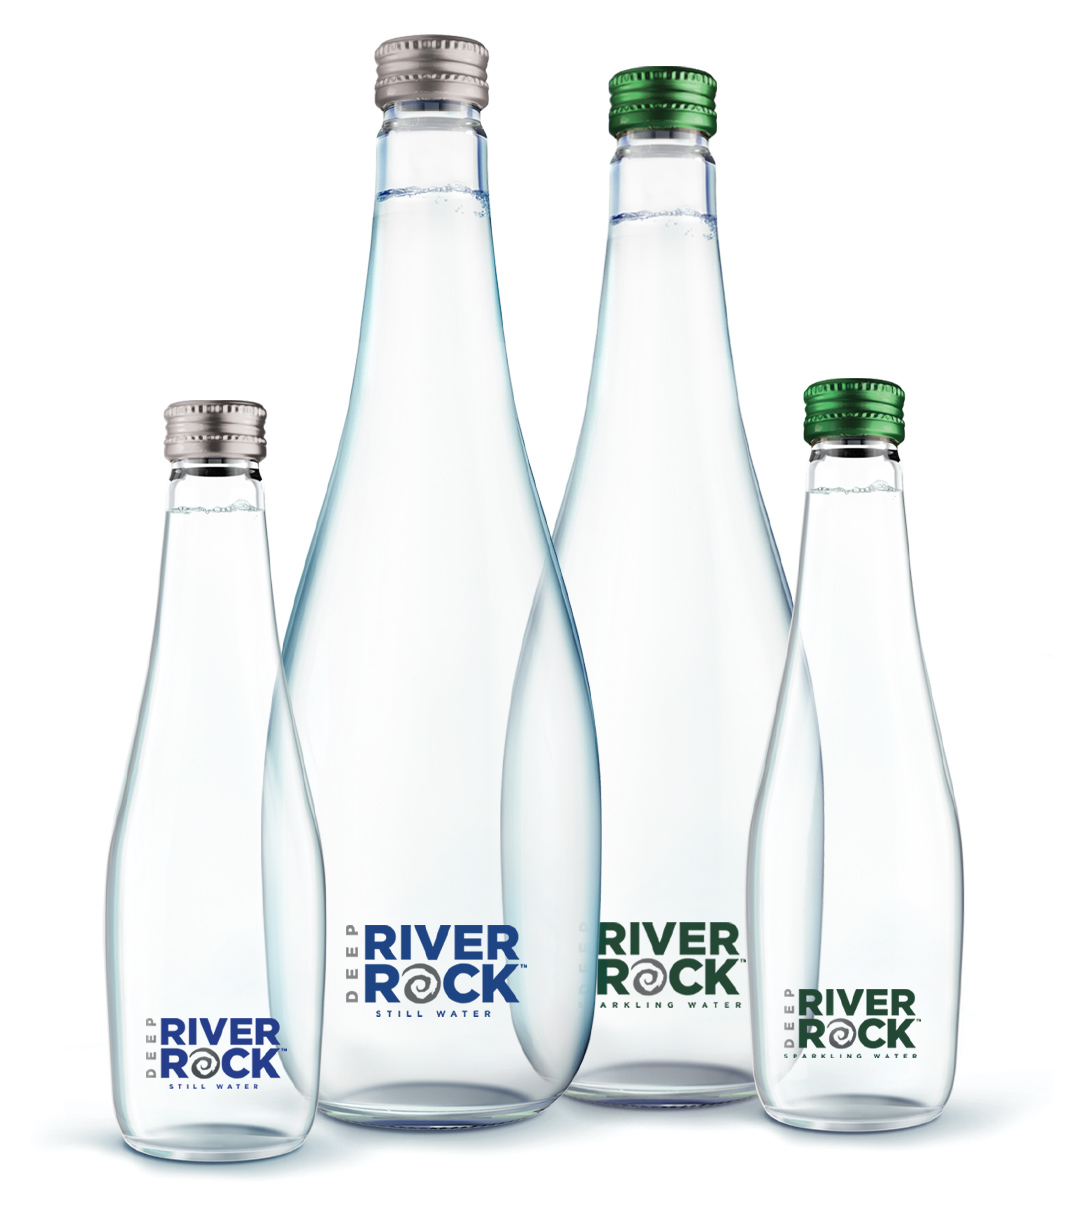 Available in still and sparkling variants each bottle in the range has been designed to reflect the minimalistic and pure shape of a water droplet, expressing purity and nature.